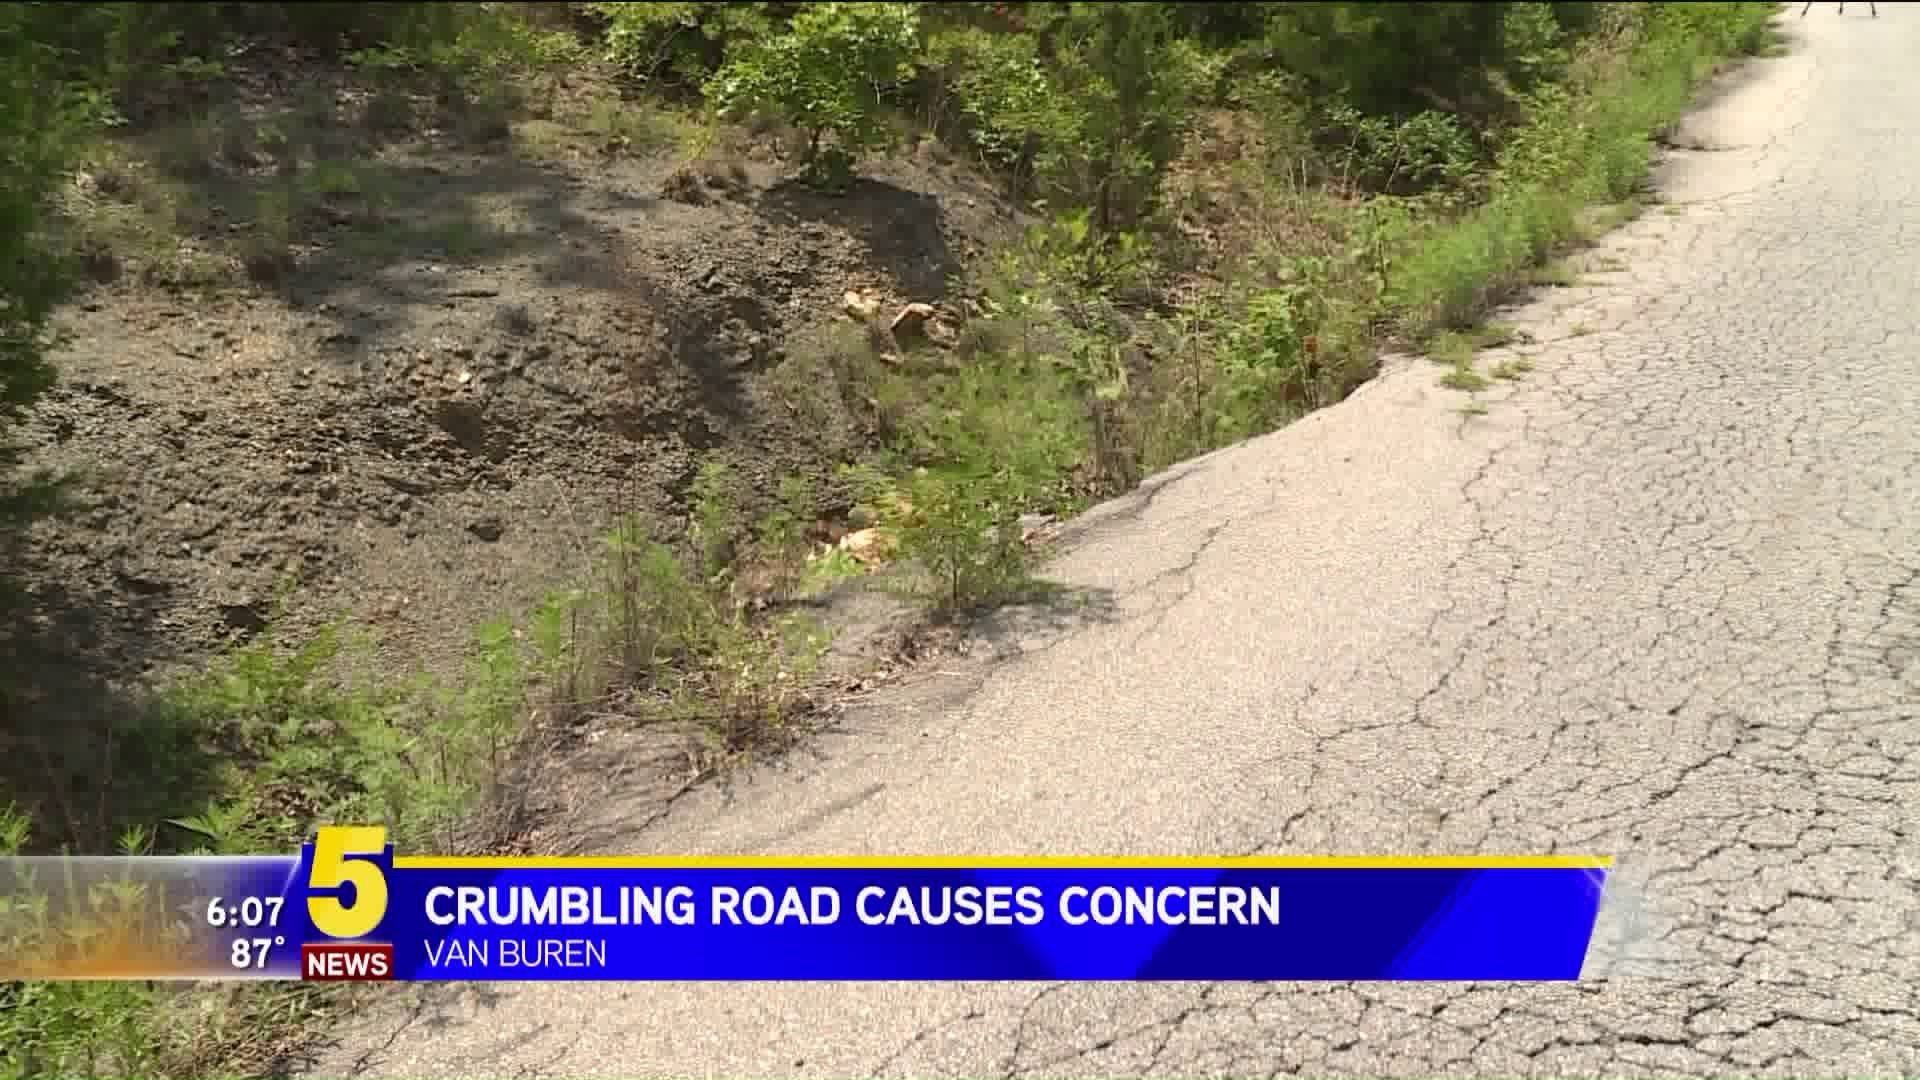 Crumbling Road Causes Concern